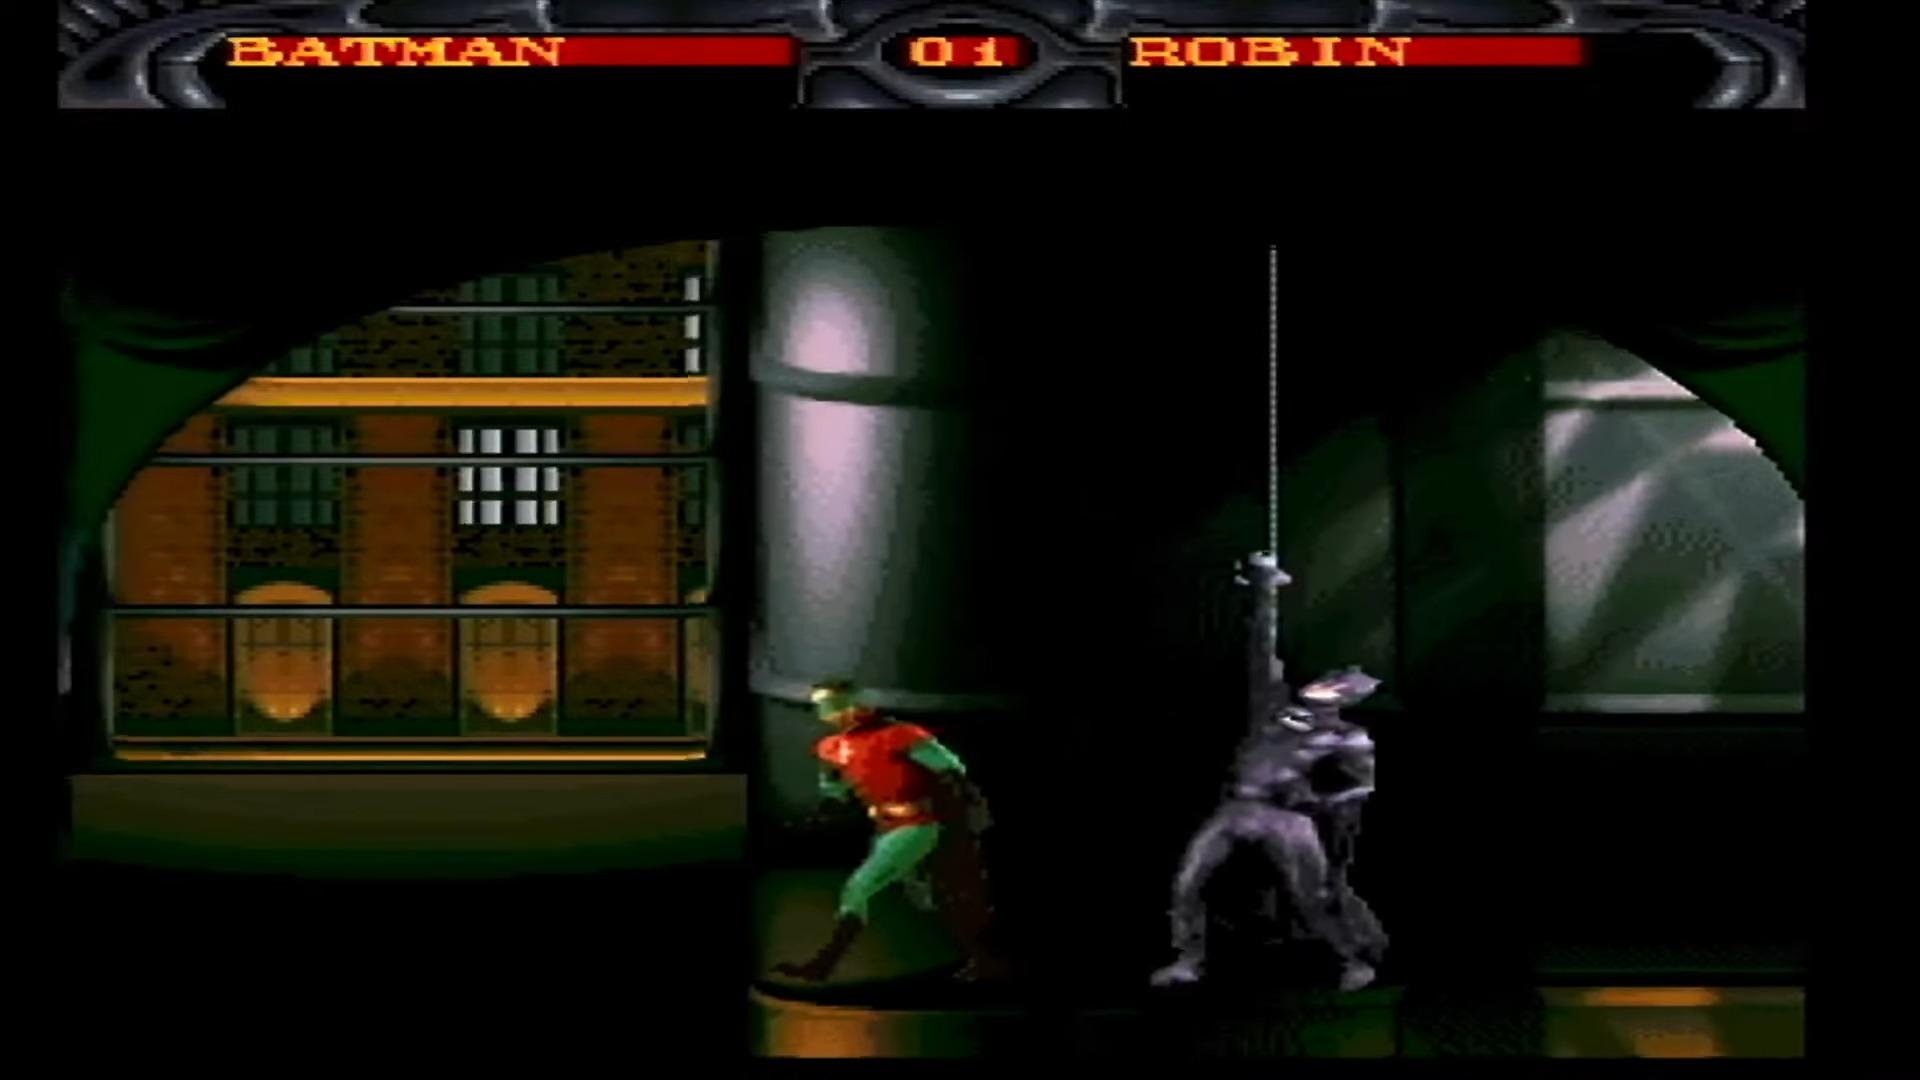 Batman Forever is a beat 'em up game based on the movie Batman Forever.